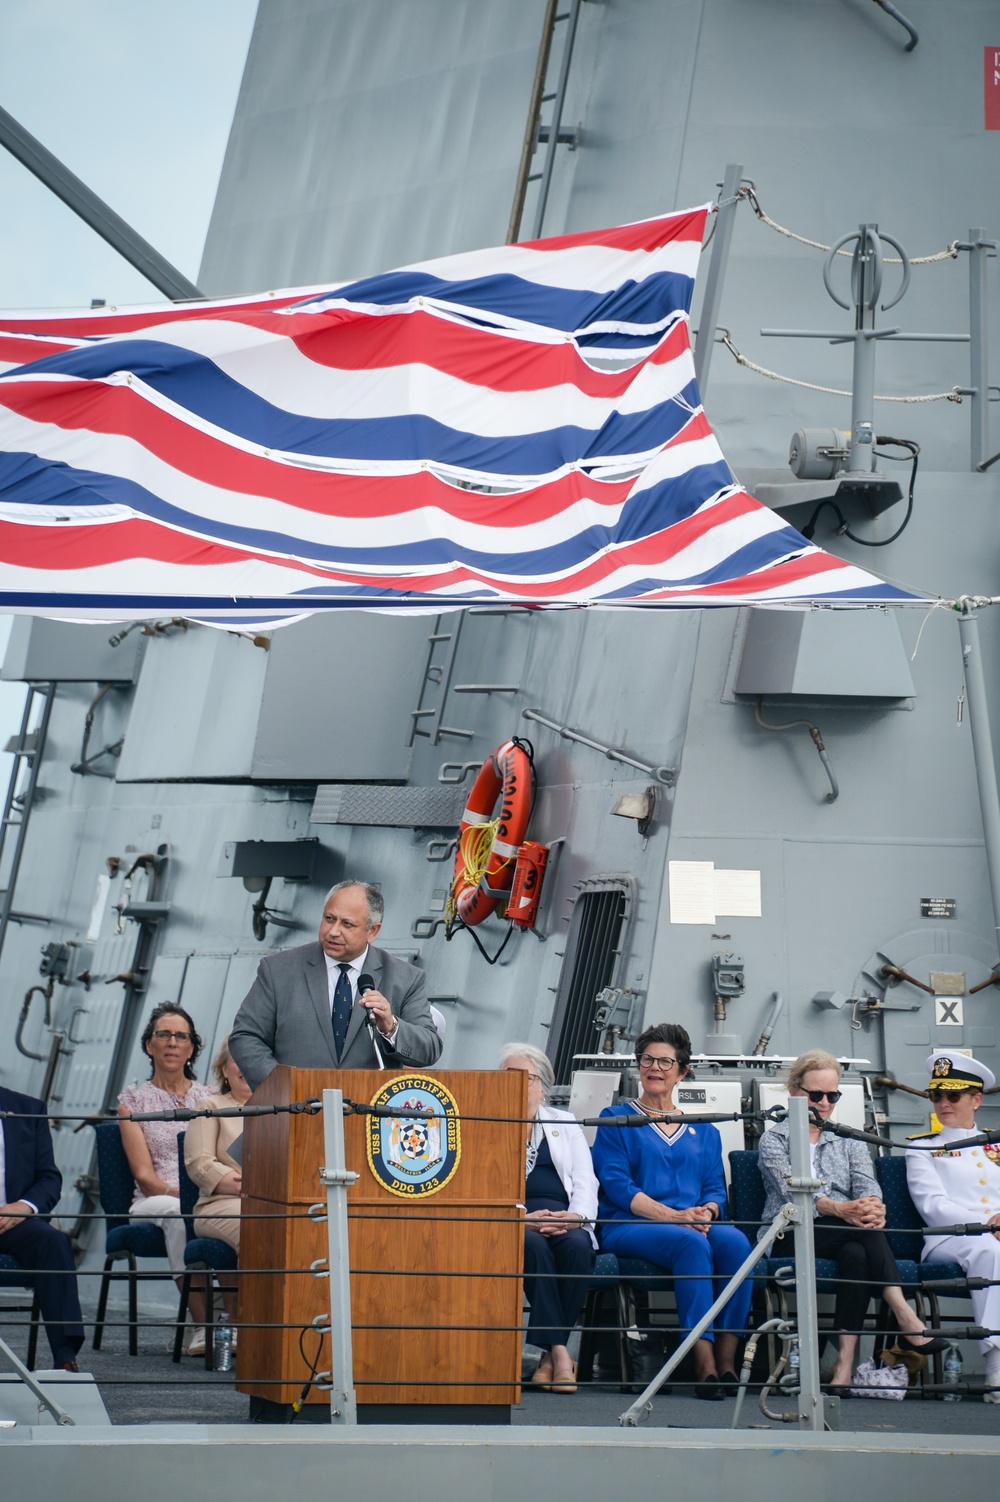 USS Lenah Sutcliffe Higbee Commissions in Conch Republic Honoring Navy Nurses